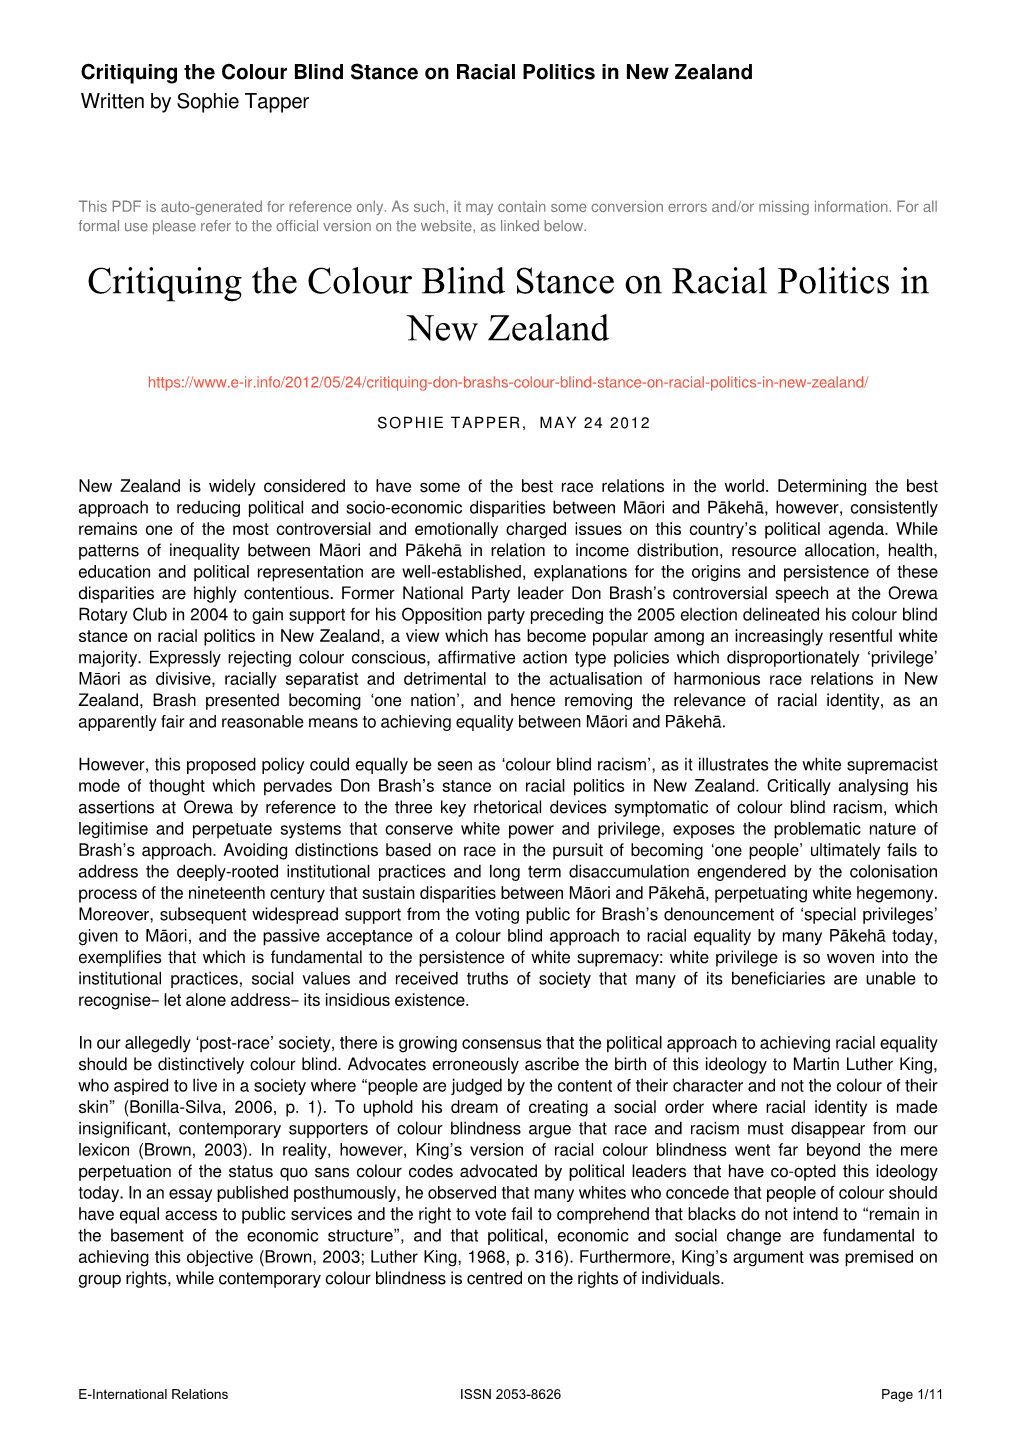 Critiquing the Colour Blind Stance on Racial Politics in New Zealand Written by Sophie Tapper